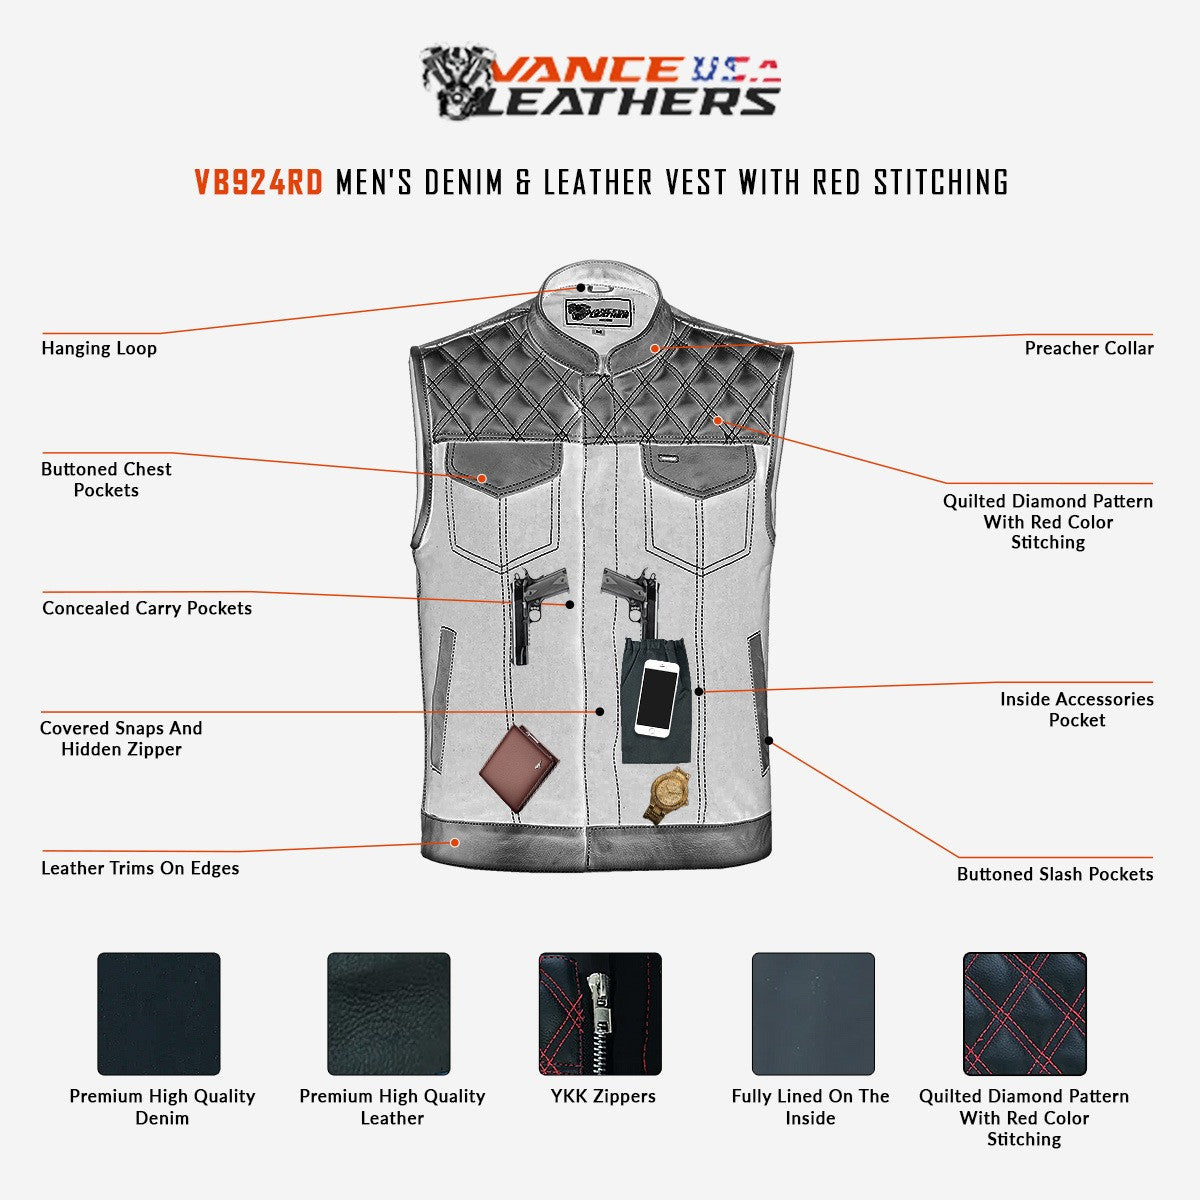 Vance-Leather-Infographic-detailed